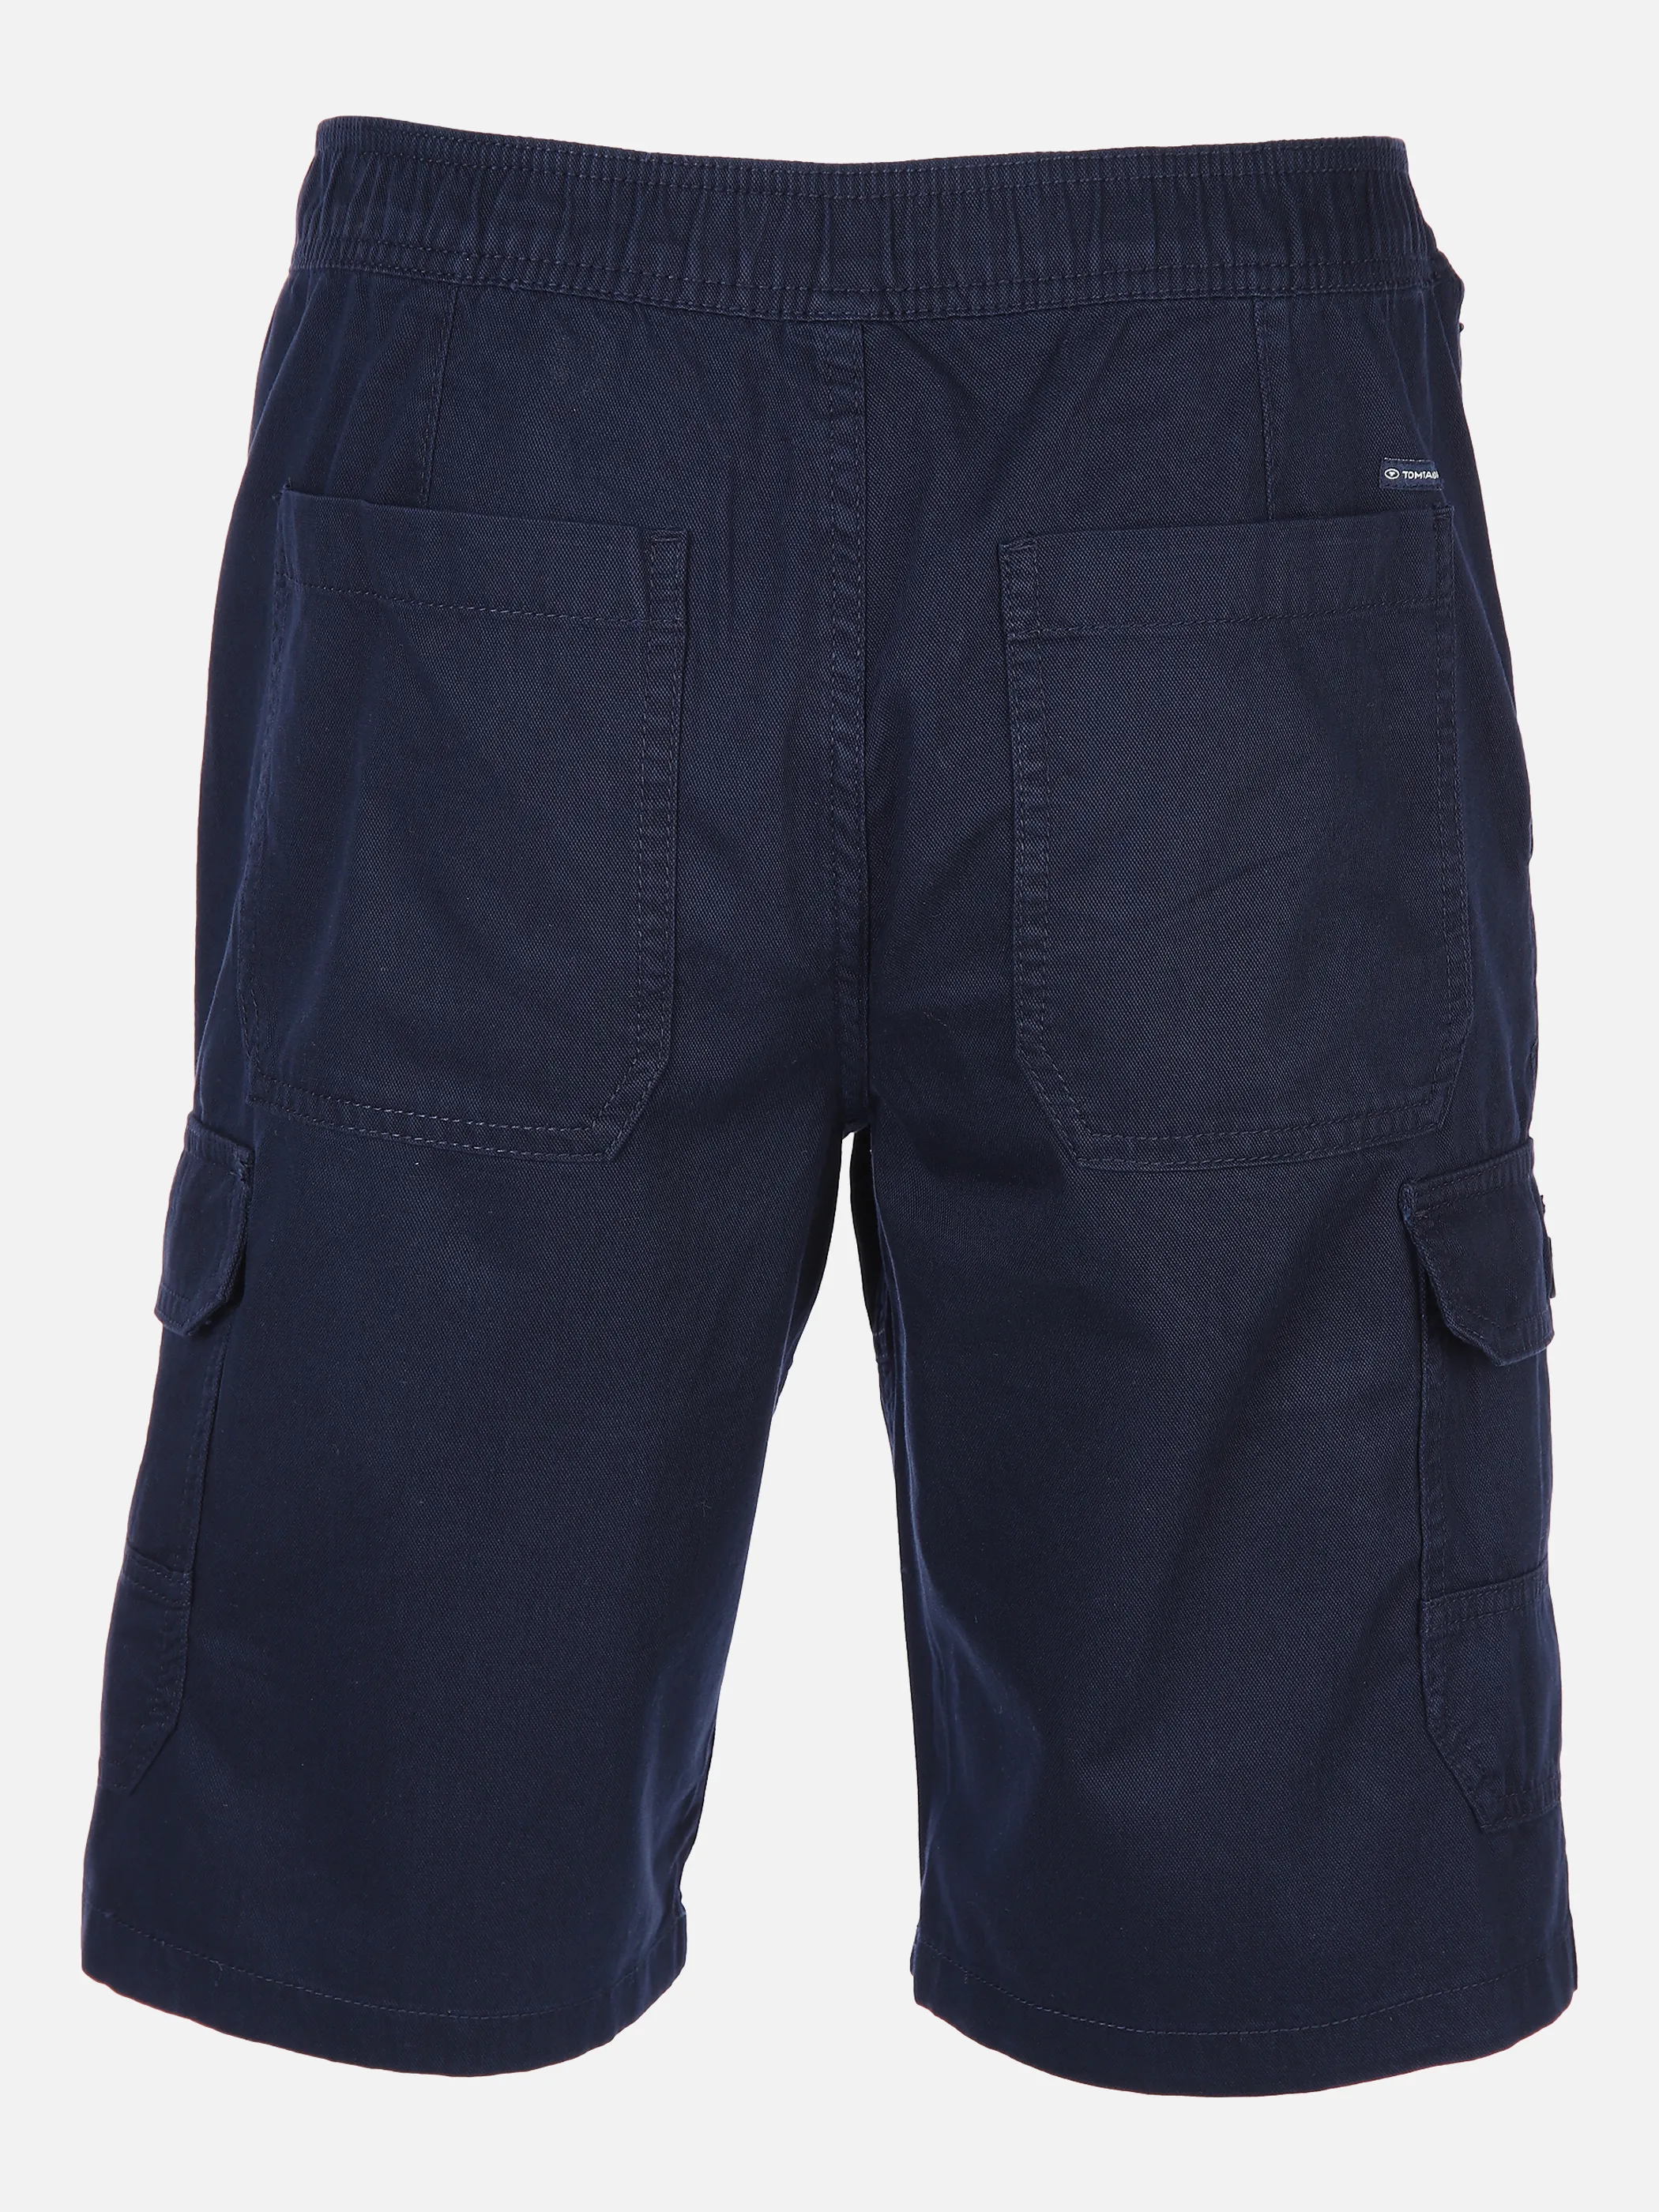 Tom Tailor 1031446 relaxed cargo shorts Blau 864567 10668 2